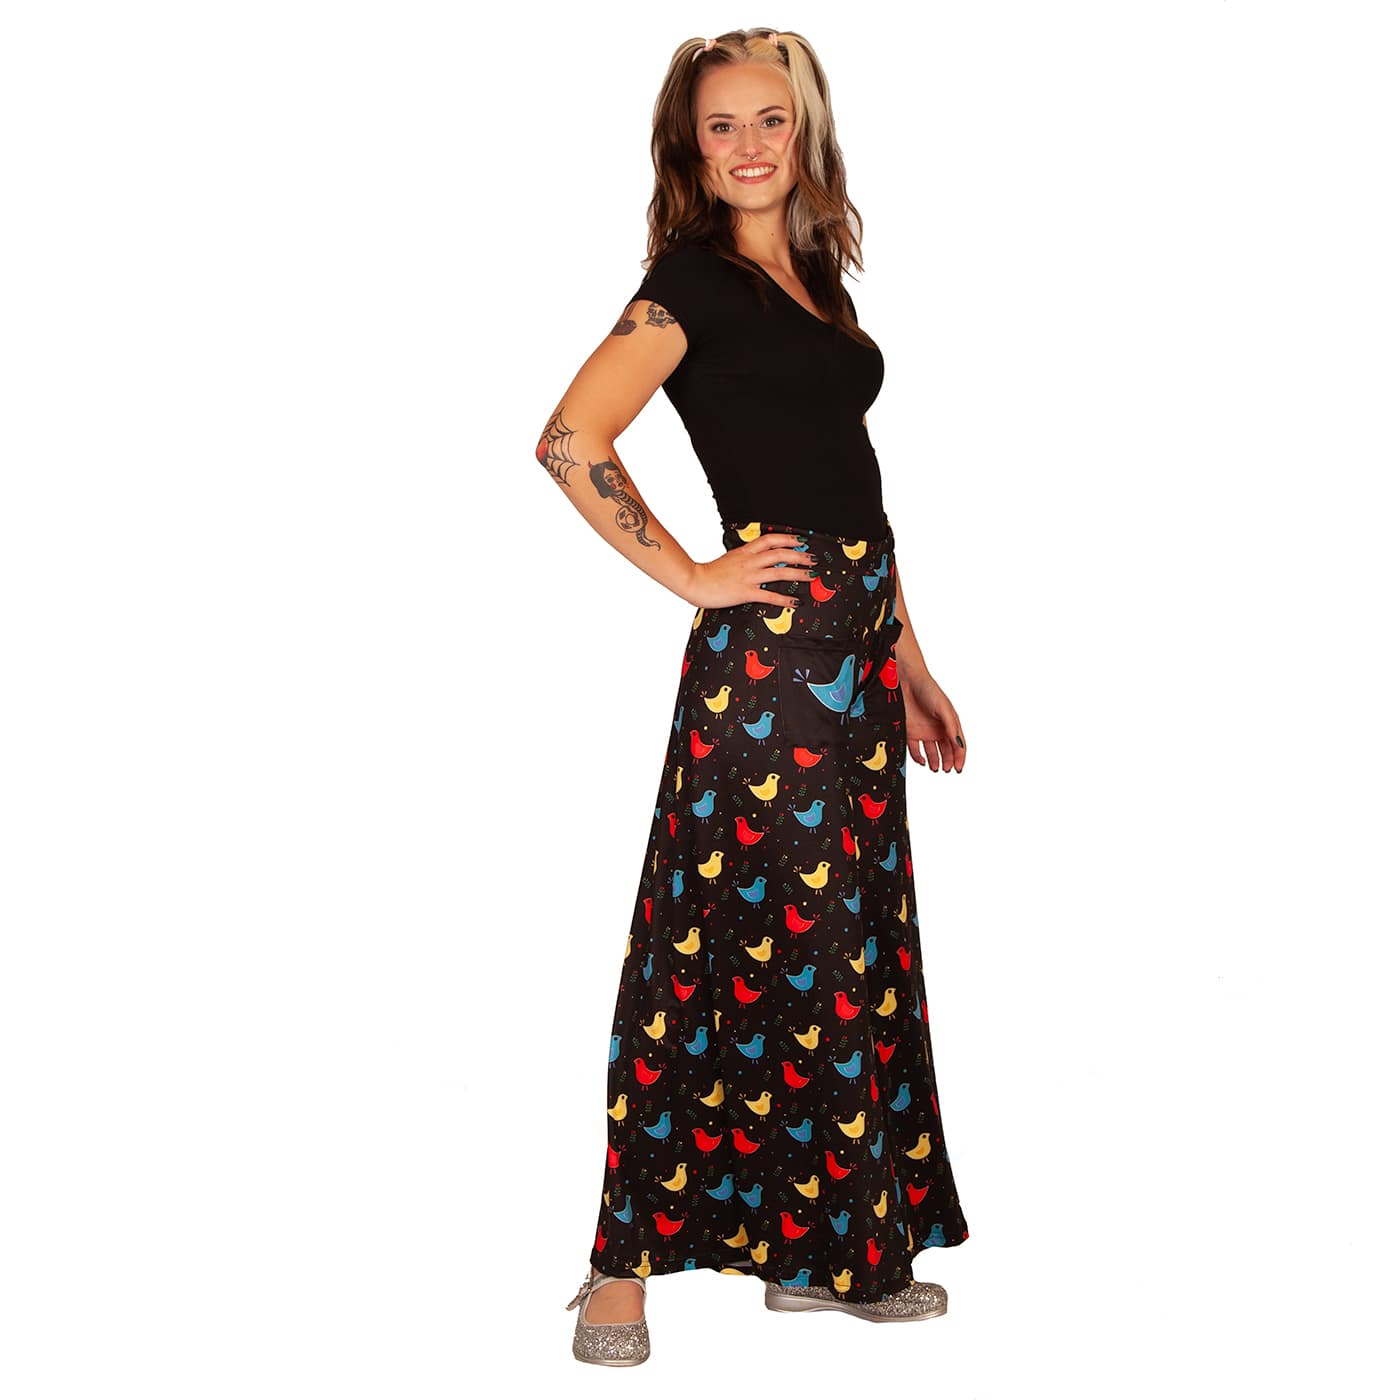 Chirp Wide Leg Pants by RainbowsAndFairies.com.au (Cute Birds - Partridge Family Inspired - Pants With Pockets - Pallazo Pants - Flares) - SKU: CL_WIDEL_CHIRP_ORG - Pic-03